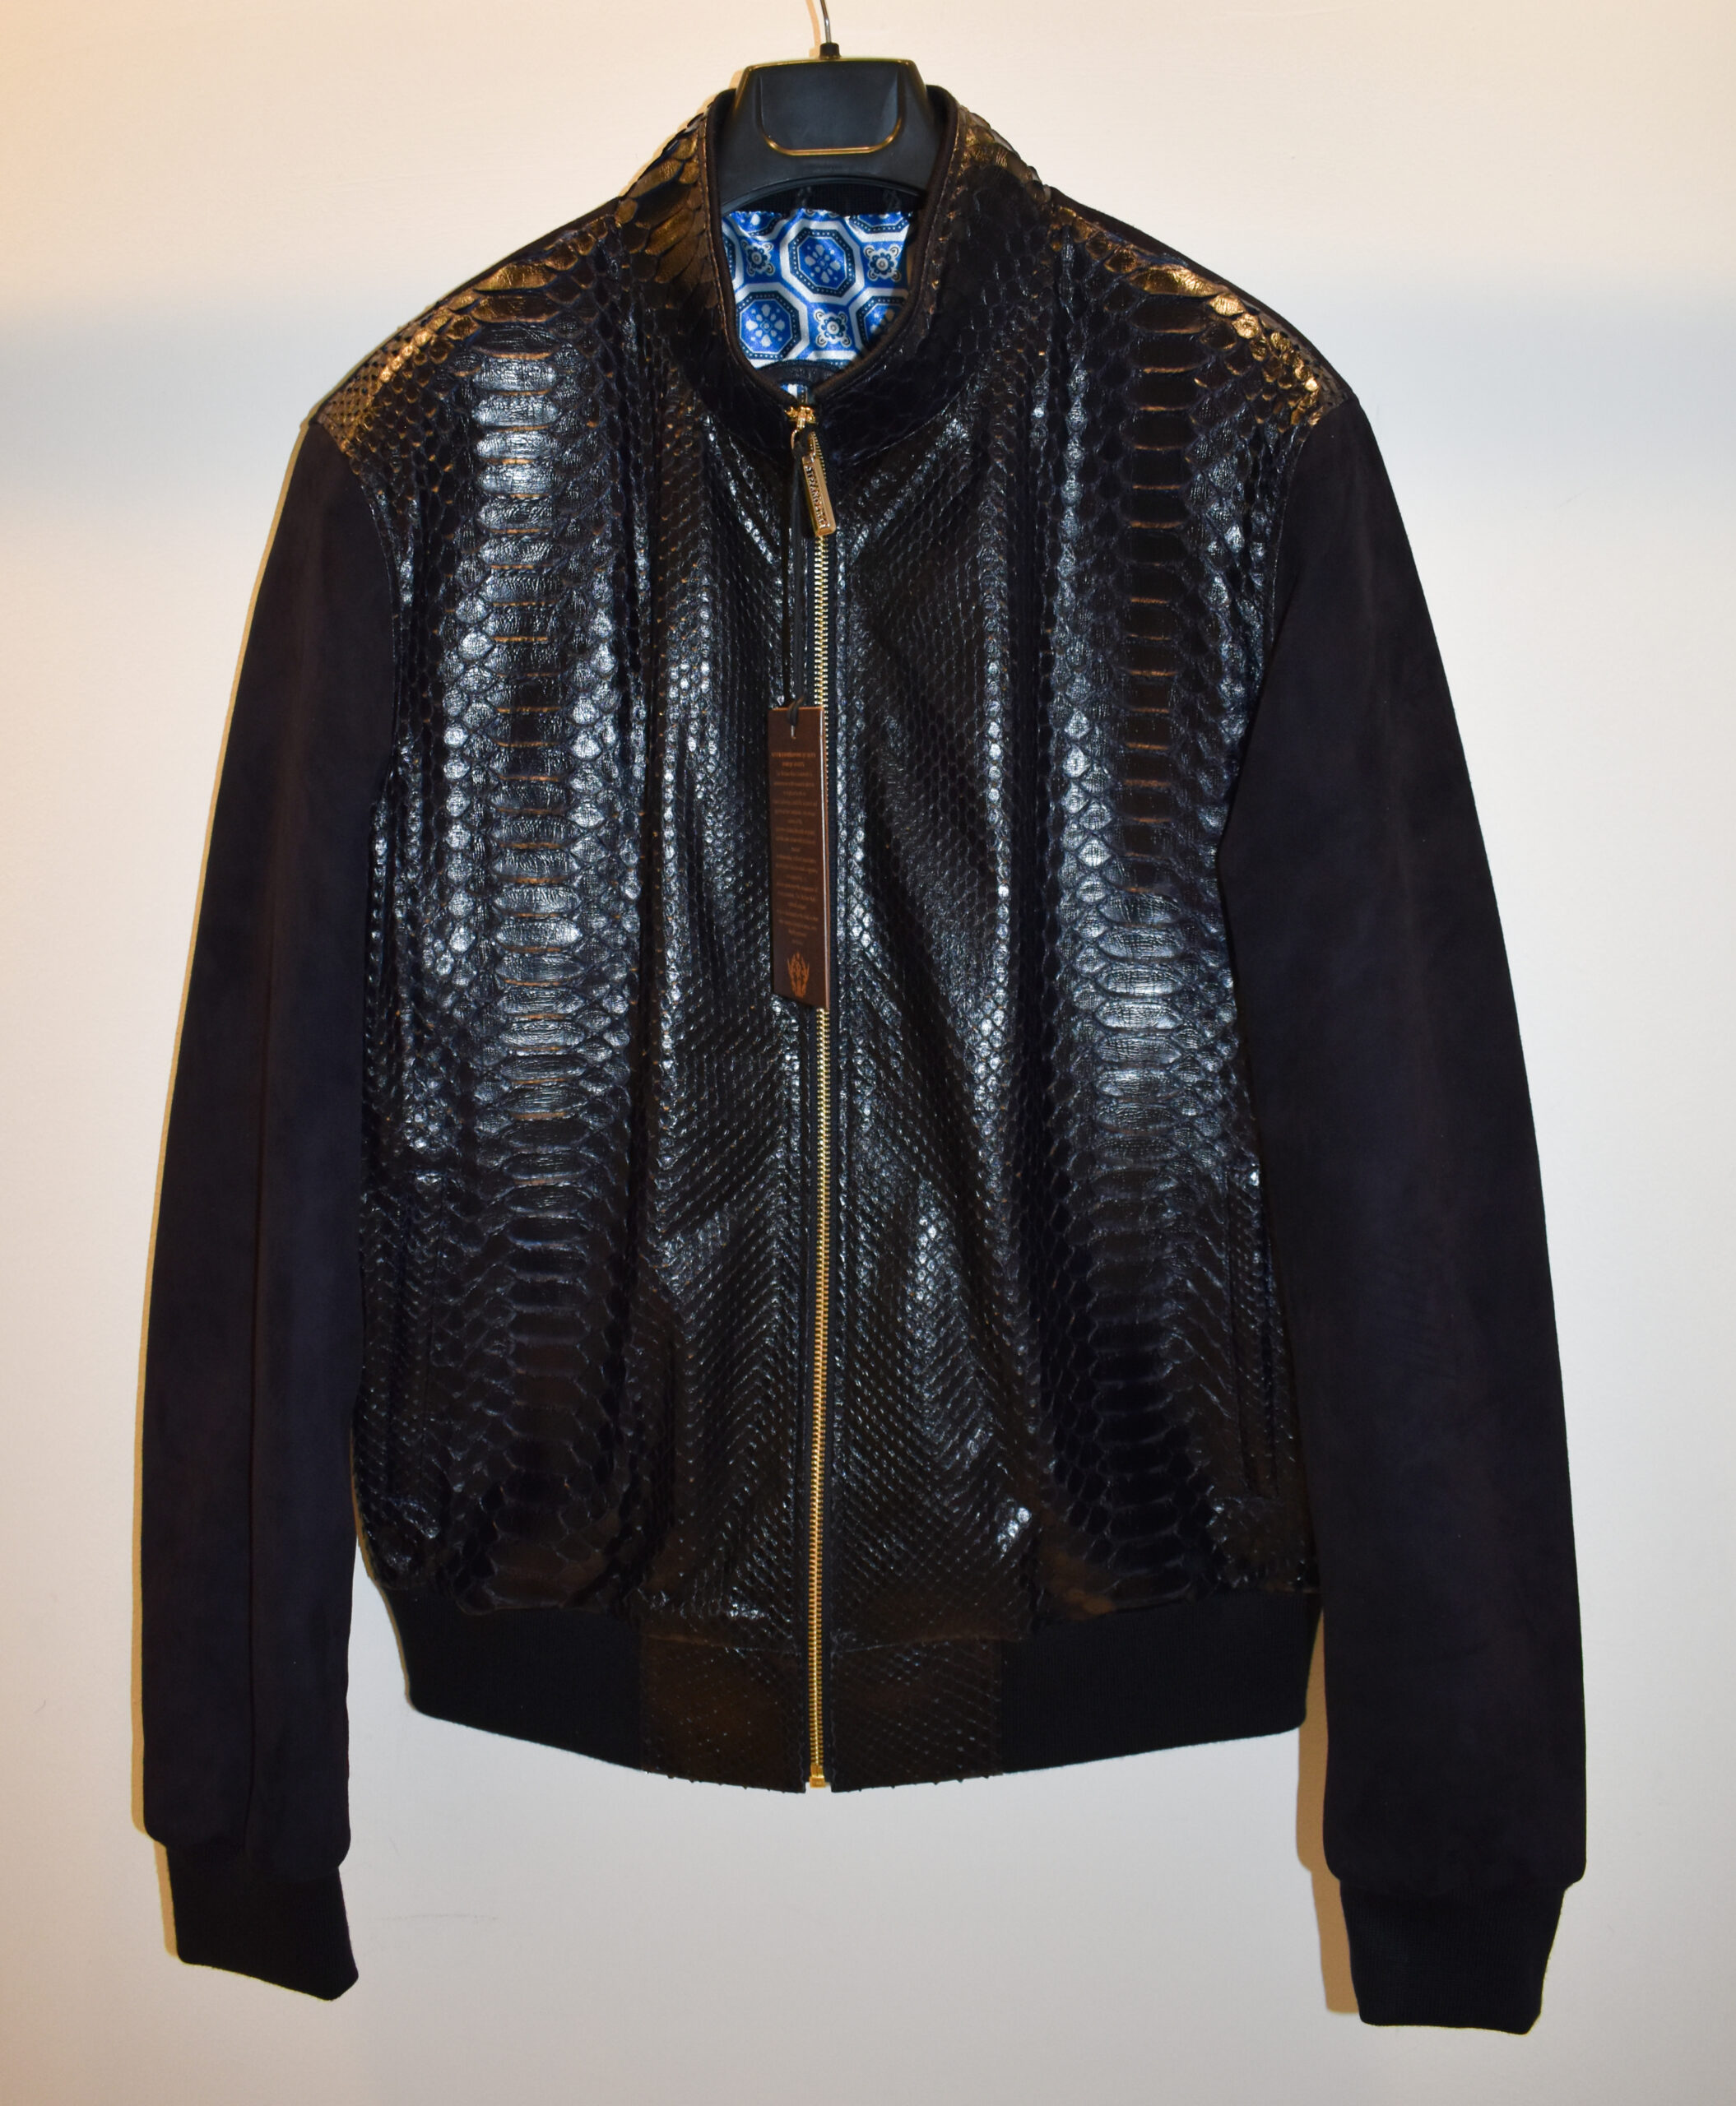 SR Blue Python Leather Suede Jacket - Leather Guys